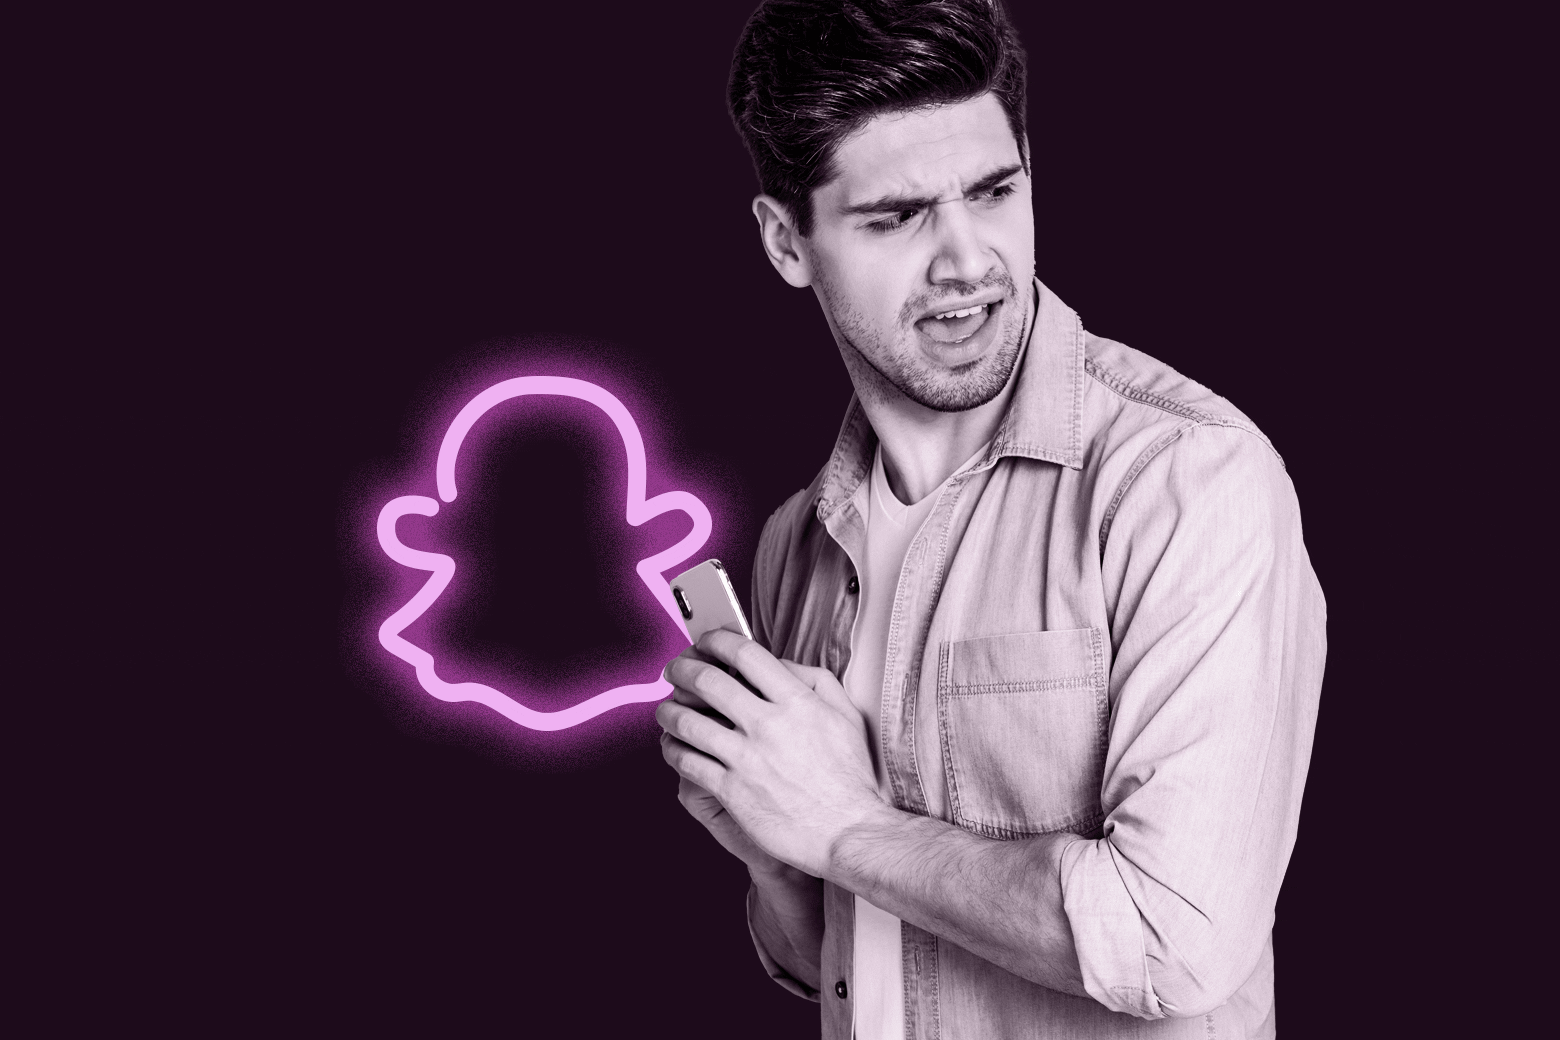 Man guarding his phone, with the glowing Snapchat ghost logo in the background